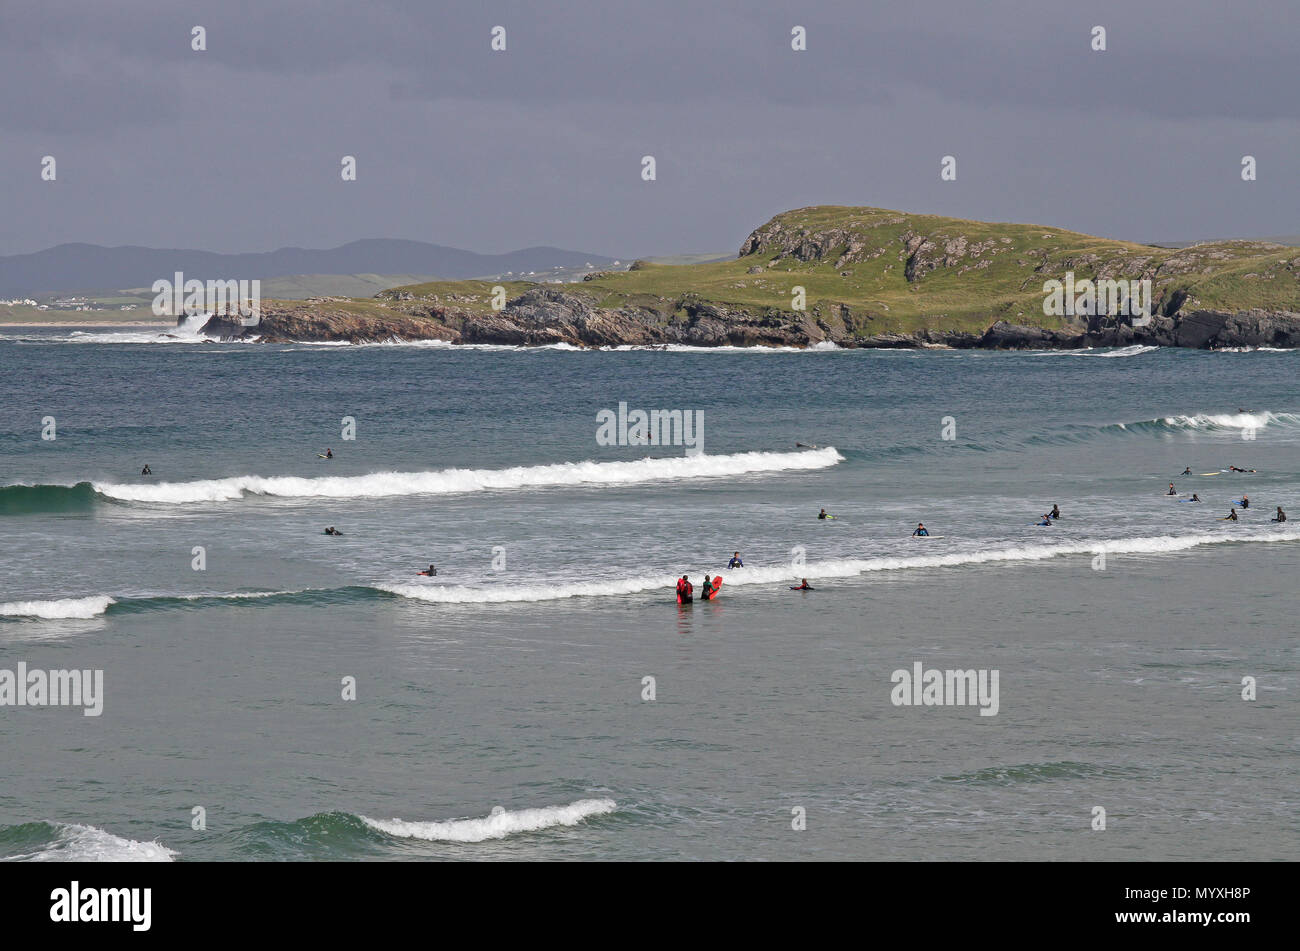 Groups of people surfing in County Donegal Ireland as summer surf schools take place in the Atlantic surf. Stock Photo